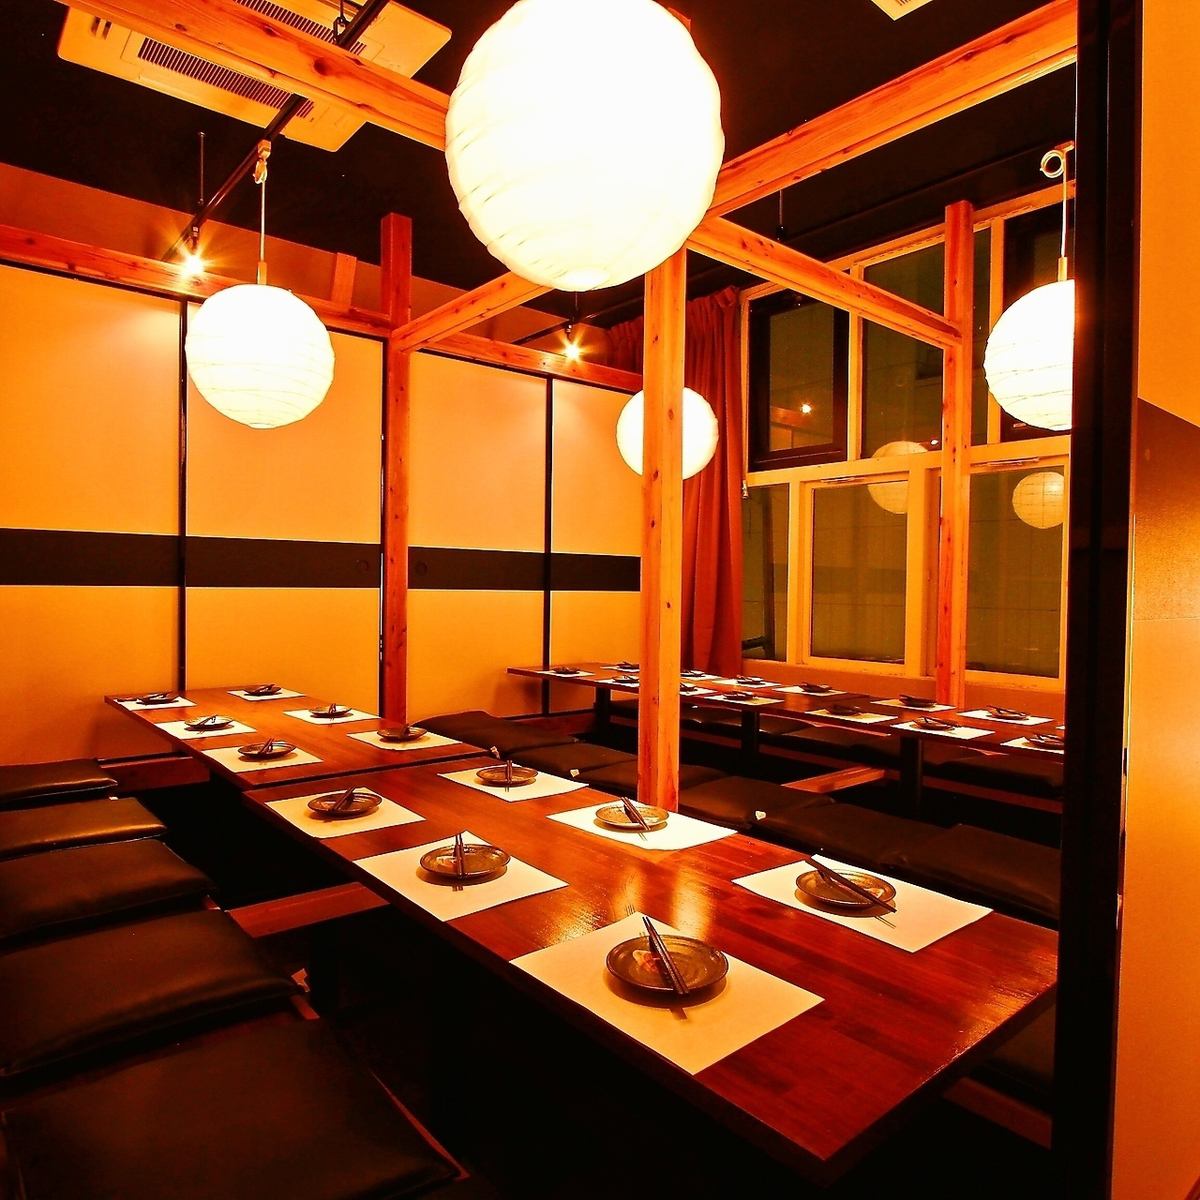 ◆1 minute walk from Shinjuku West Exit ◆All seats are completely private rooms♪